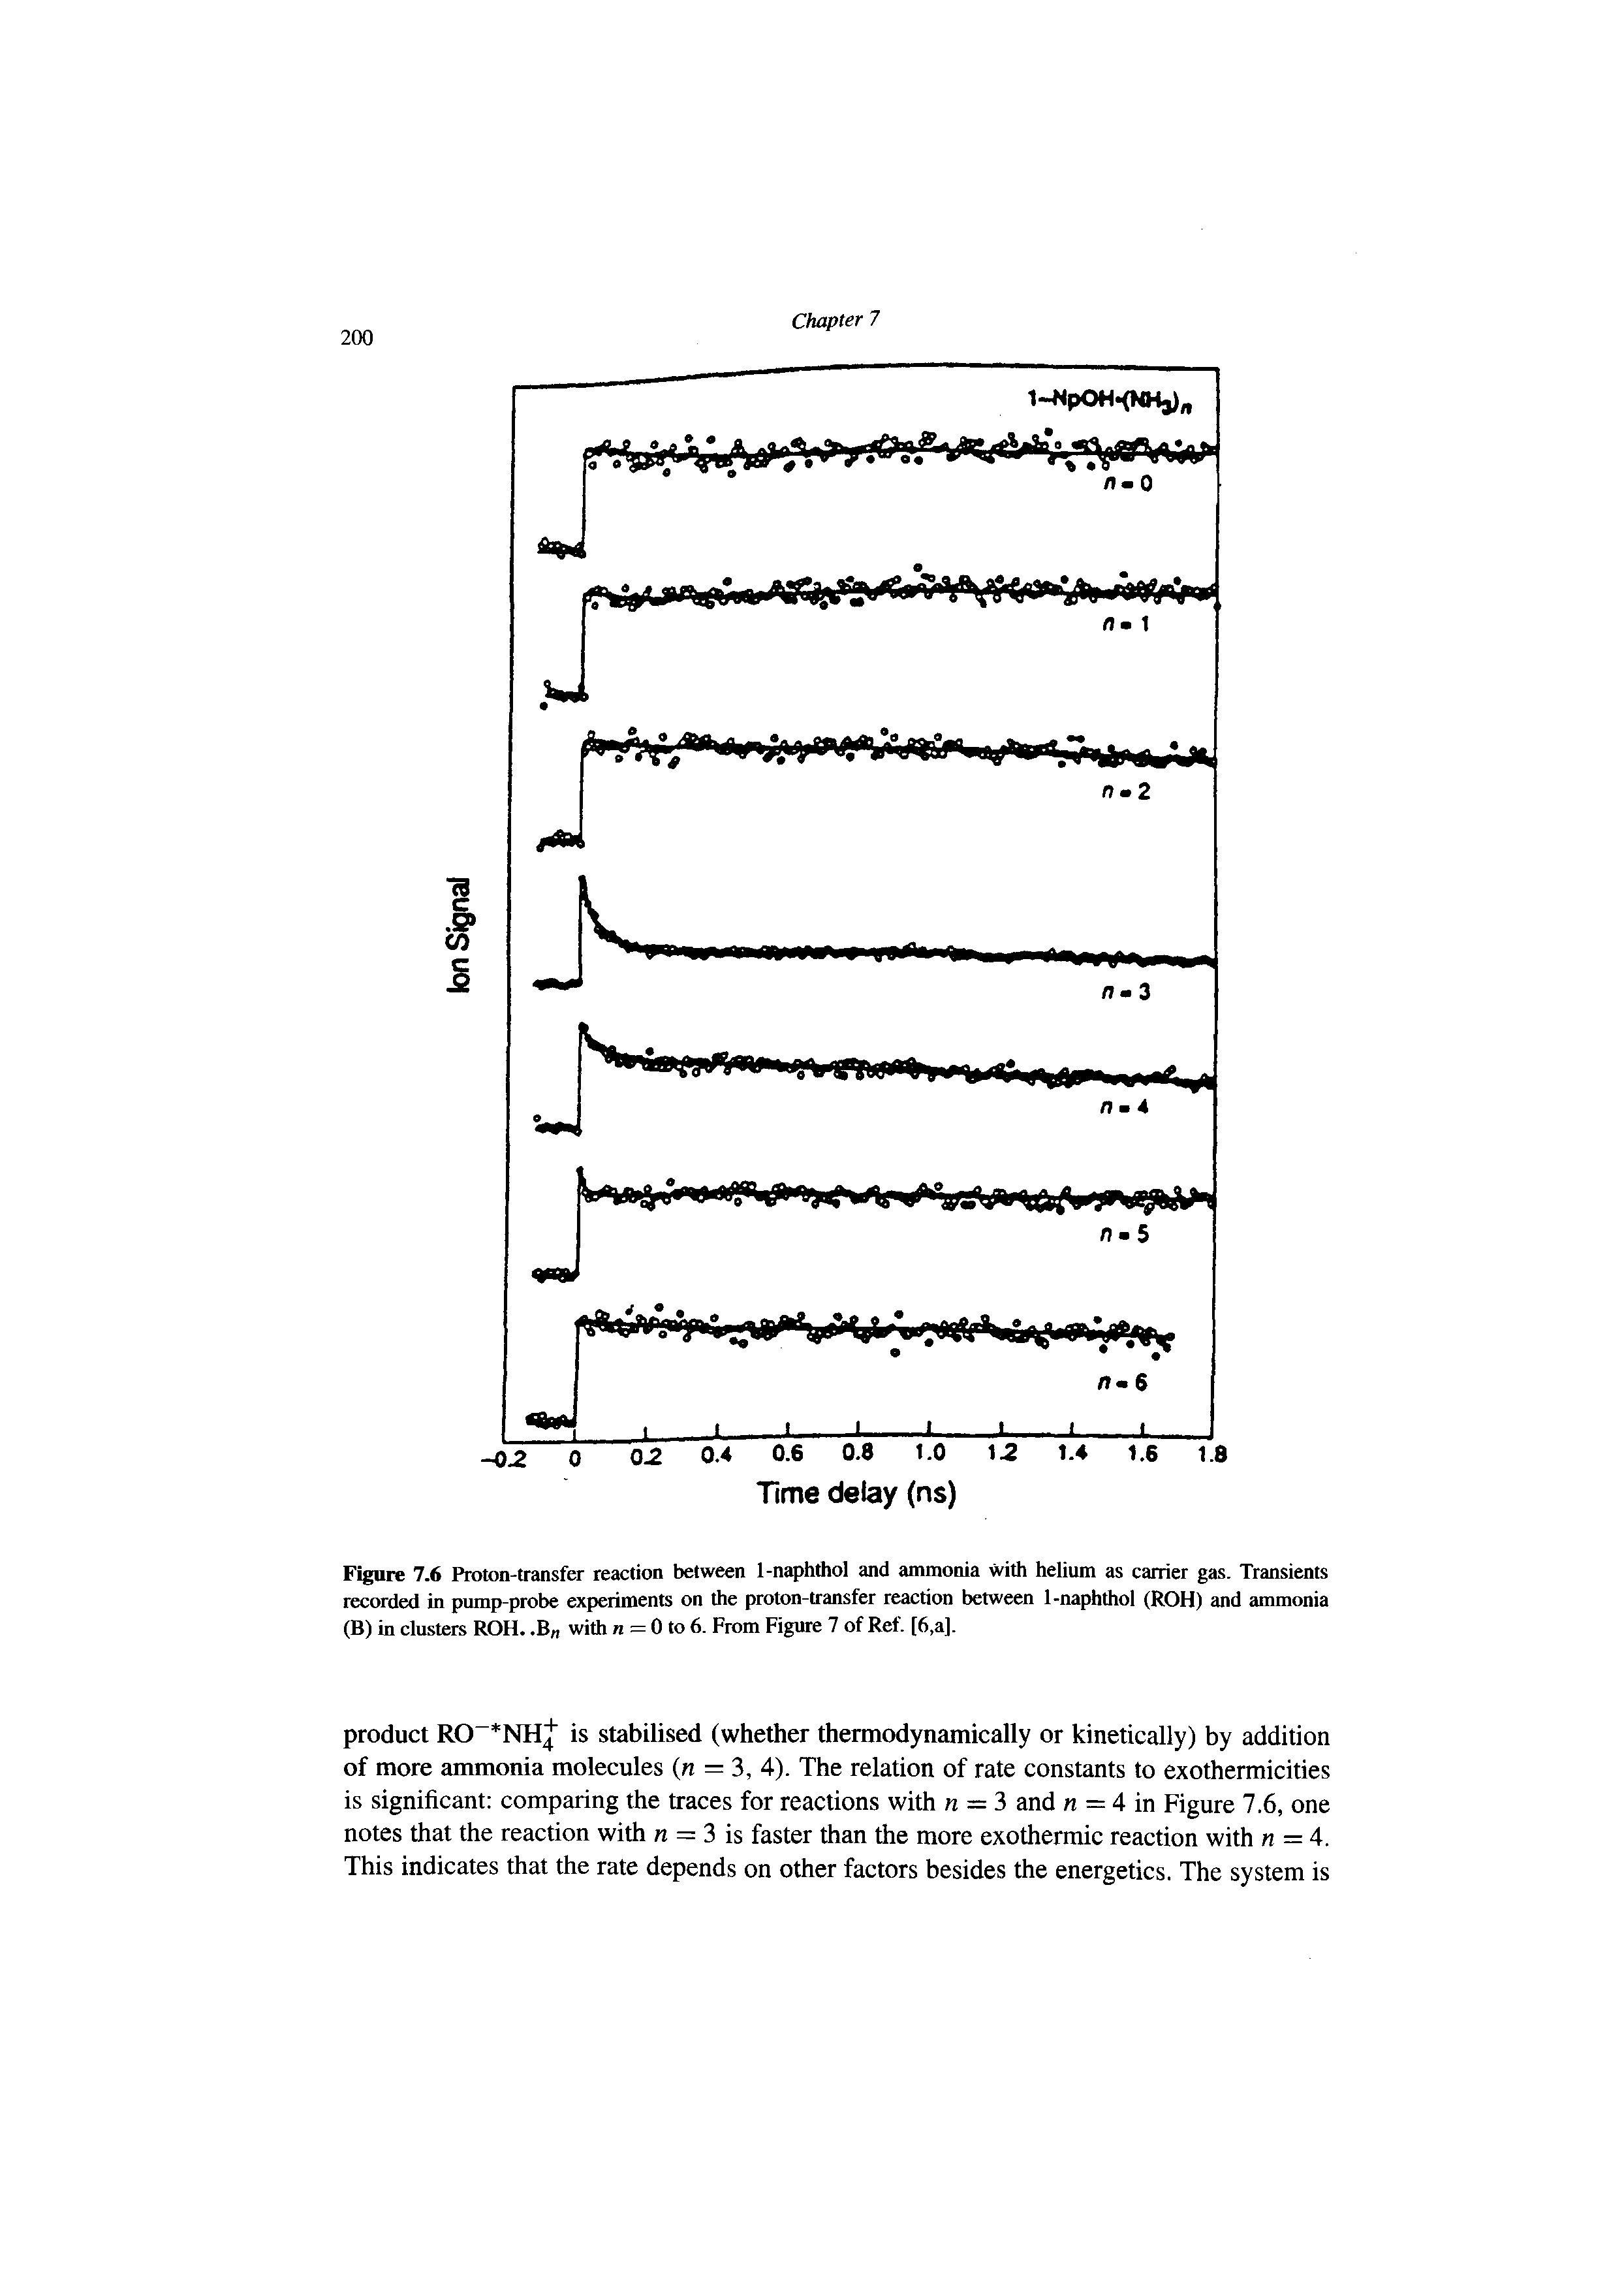 Figure 7.6 Proton-transfer reaction between 1-naphthol and ammonia with helium as carrier gas. Transients recorded in pump-probe experiments on the proton-transfer reaction between 1-naphthol (ROH) and ammonia (B) in clusters ROH.. B with n = 0 to 6. From Figure 7 of Ref. [6,a].